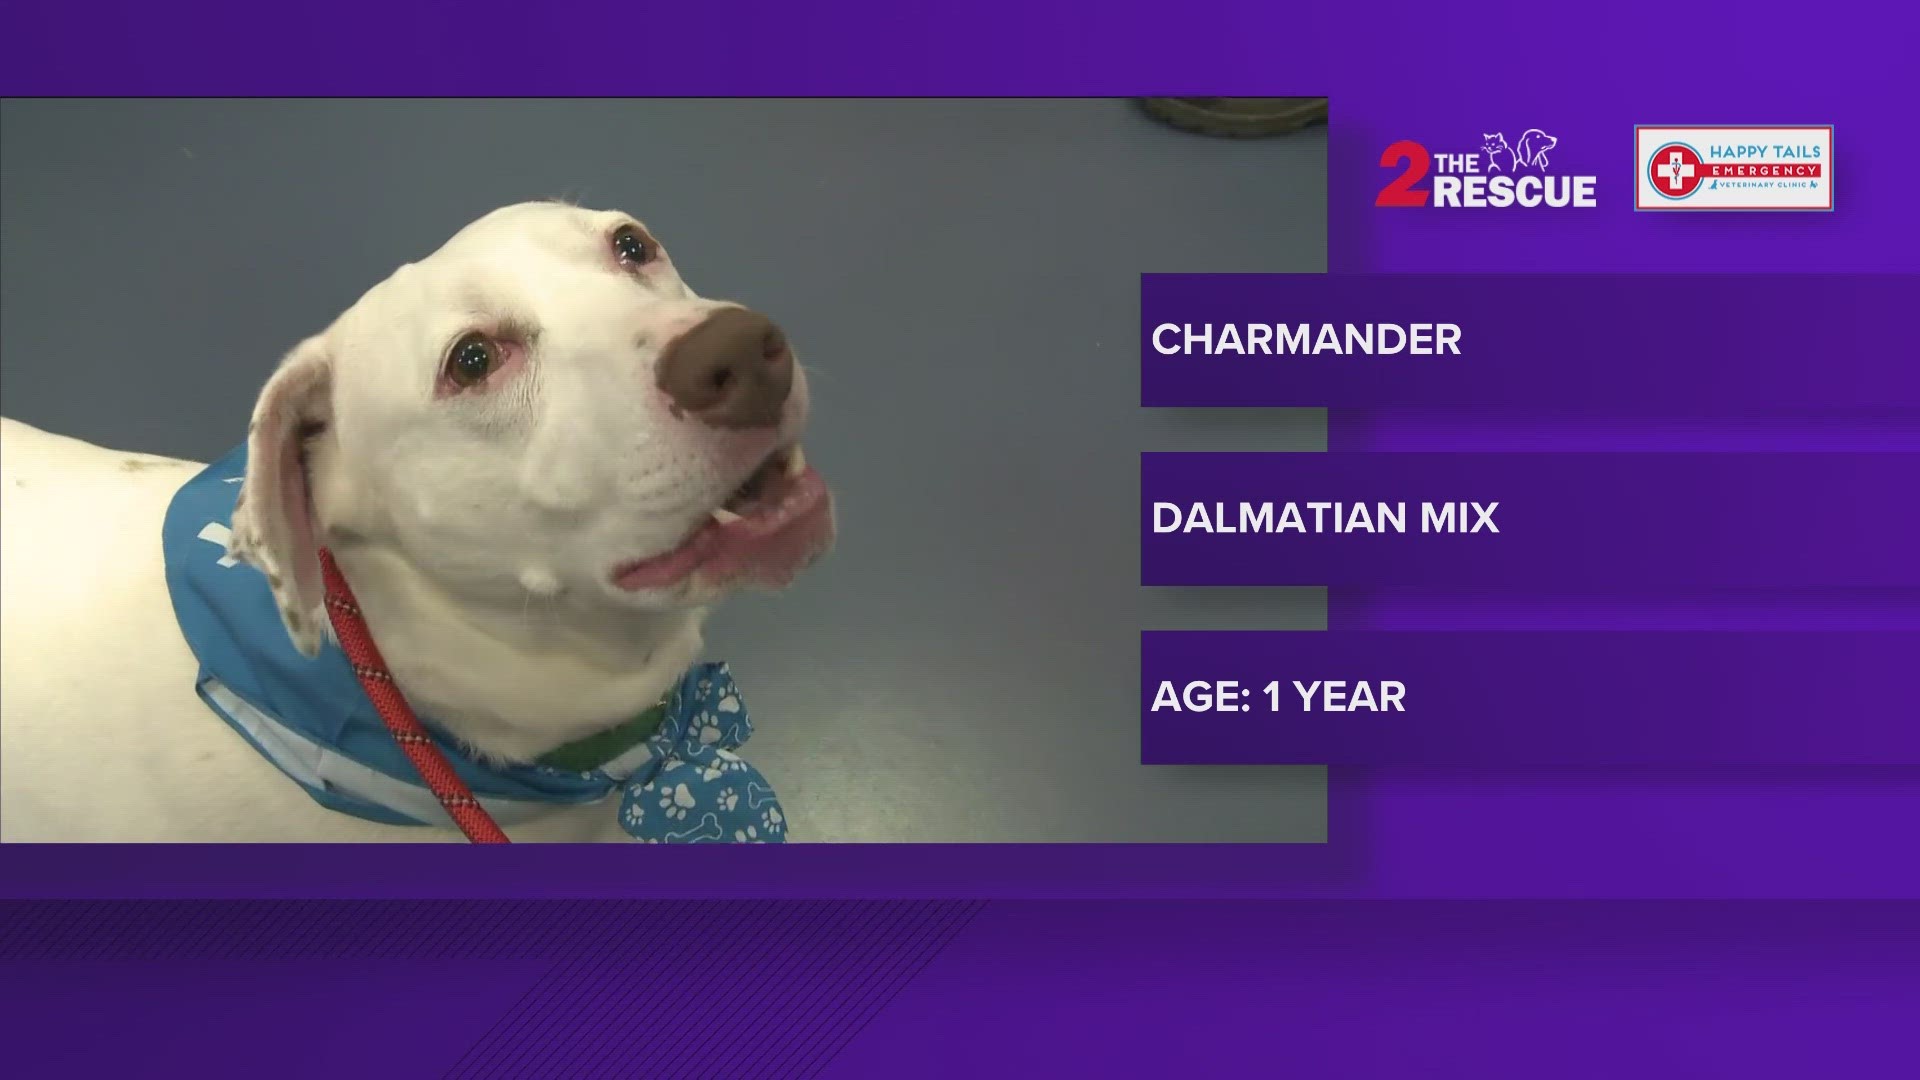 Charmander is a one-year-old Dalmatian mix who is approximately 55 pounds. His sweet nature has charmed his staff and volunteers. He is partially deaf but doesn’t mi